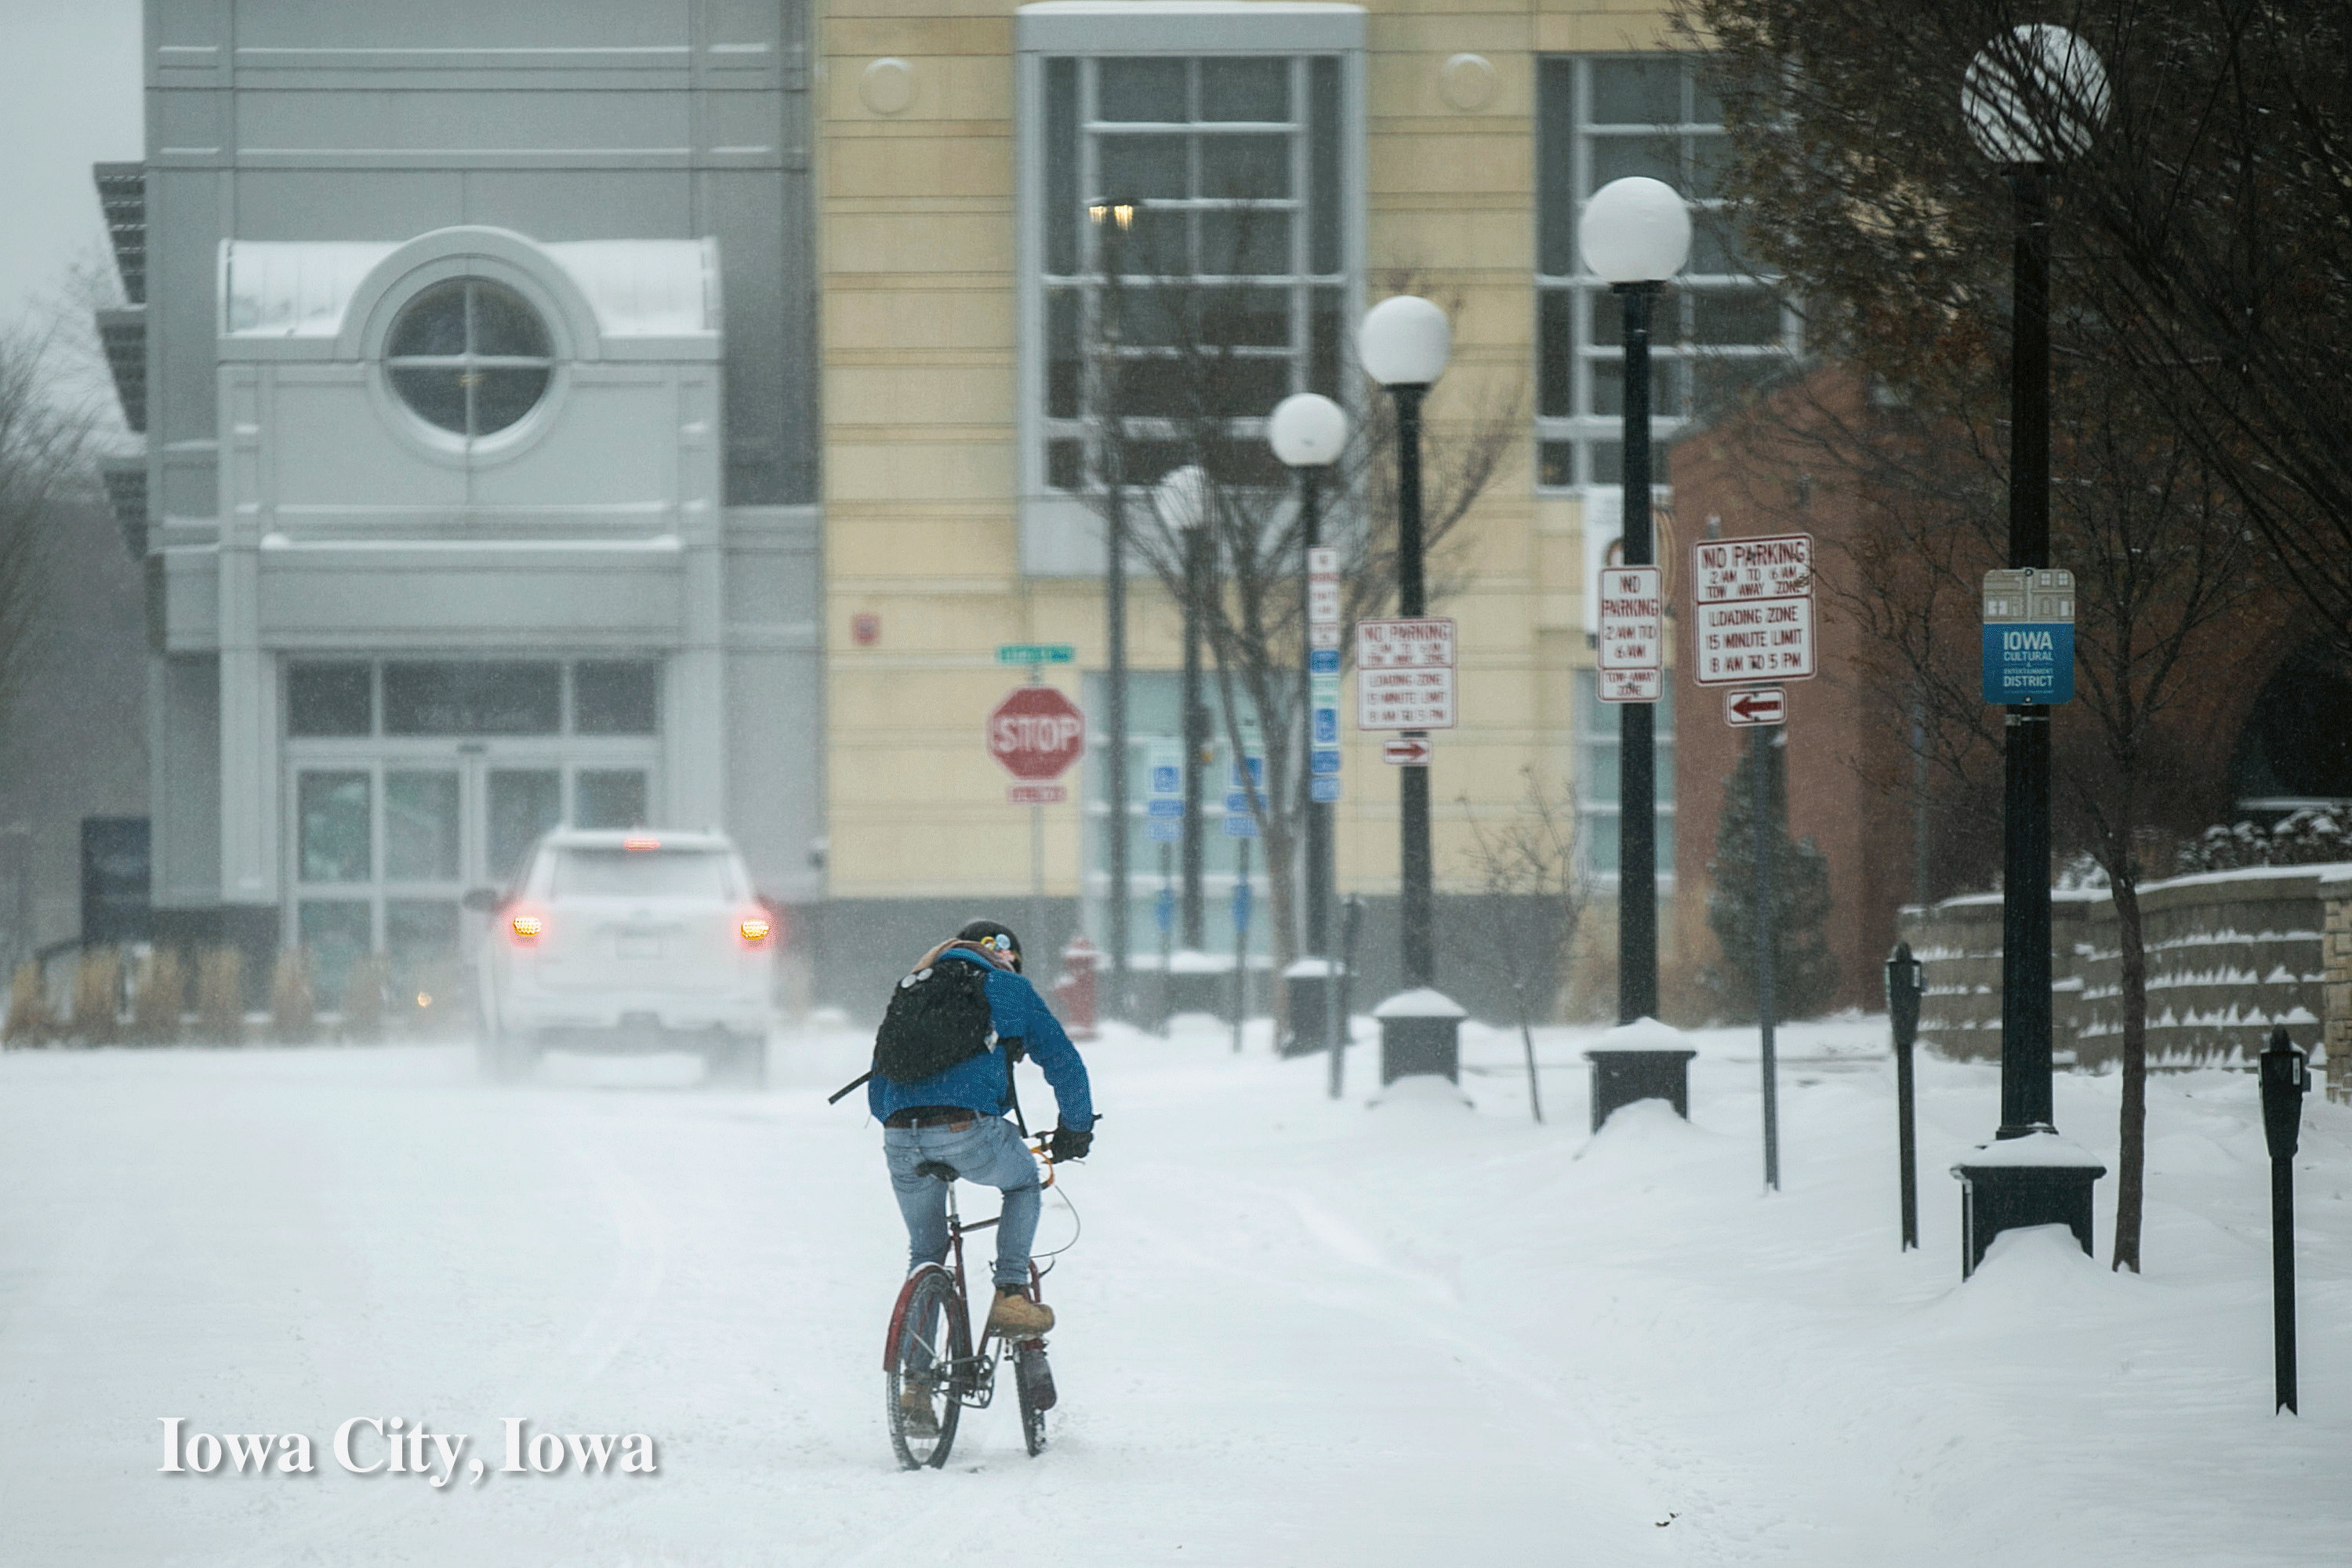 Snowy road in Iowa City, Iowa and cyclists around the Shoreline Aquatic Park in Long Beach